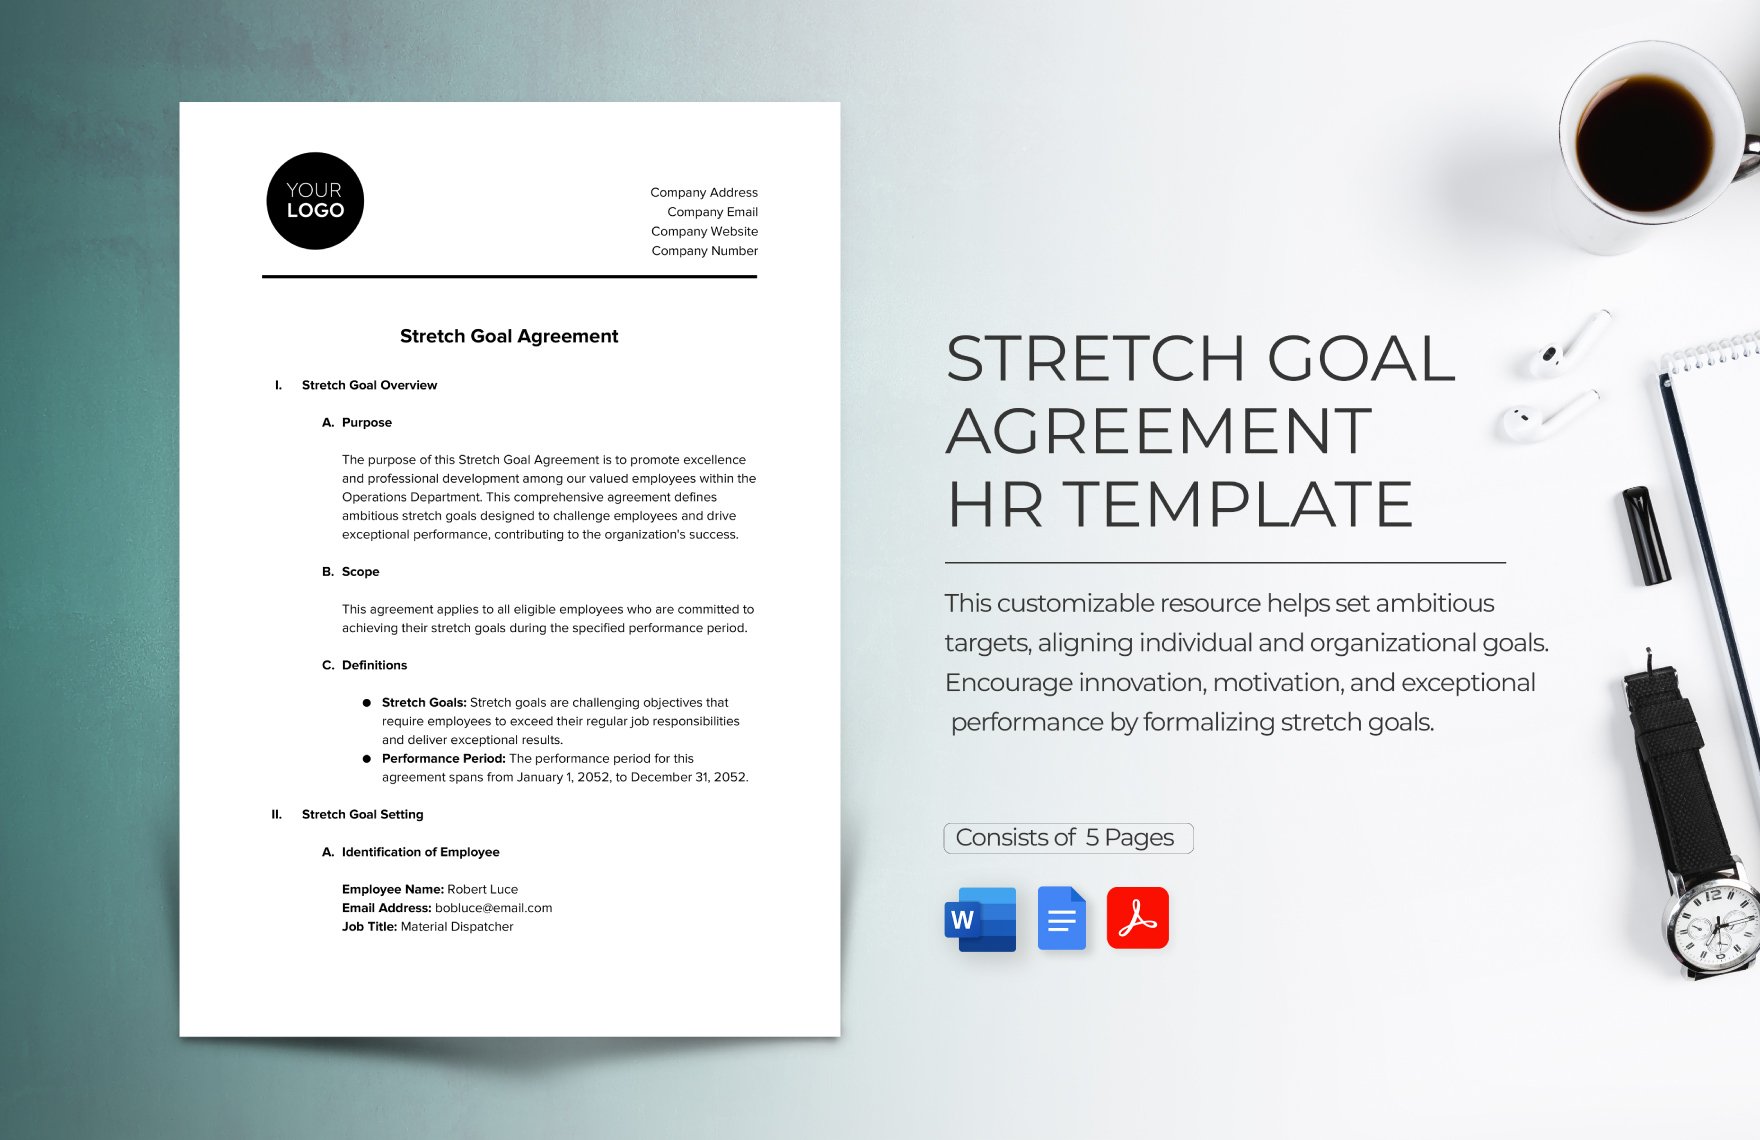 Stretch Goal Agreement HR Template in Word, Google Docs, PDF